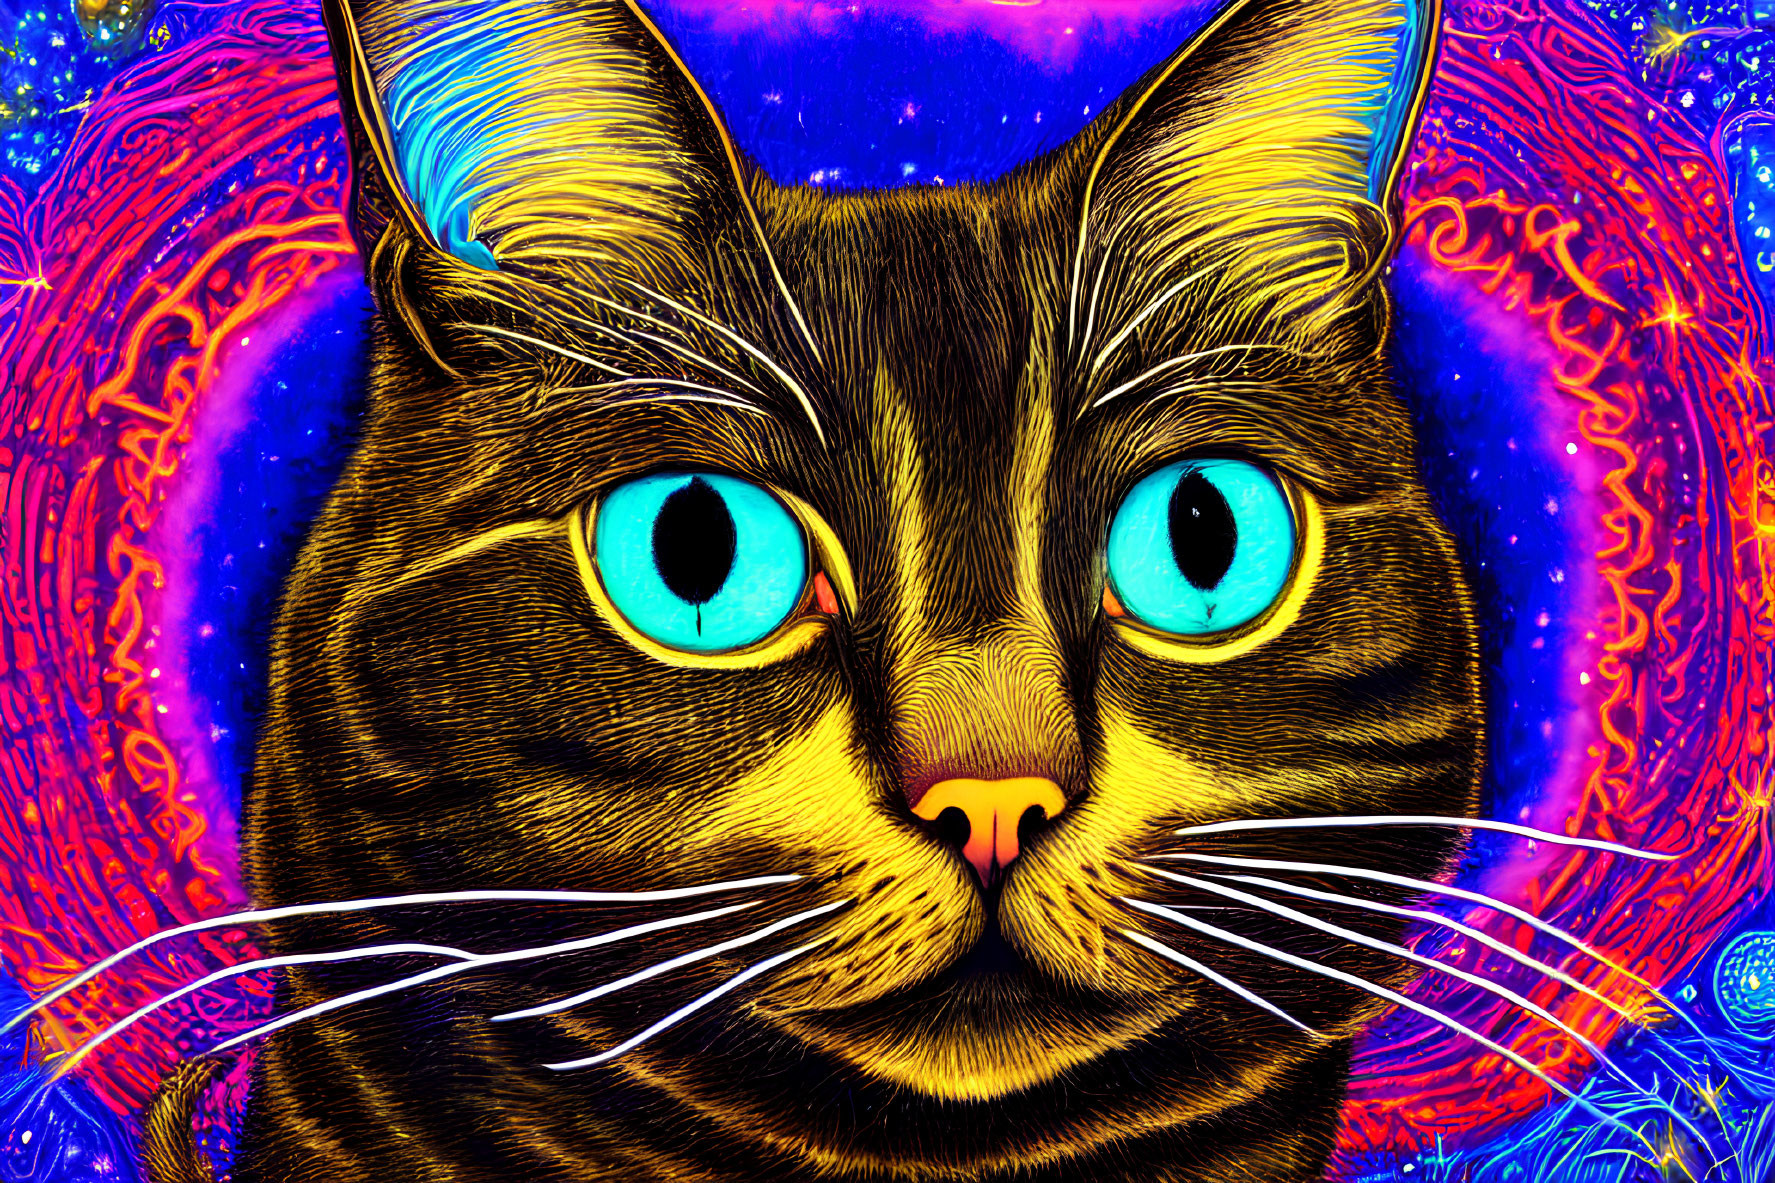 Colorful digital artwork: Cat with blue eyes and cosmic background